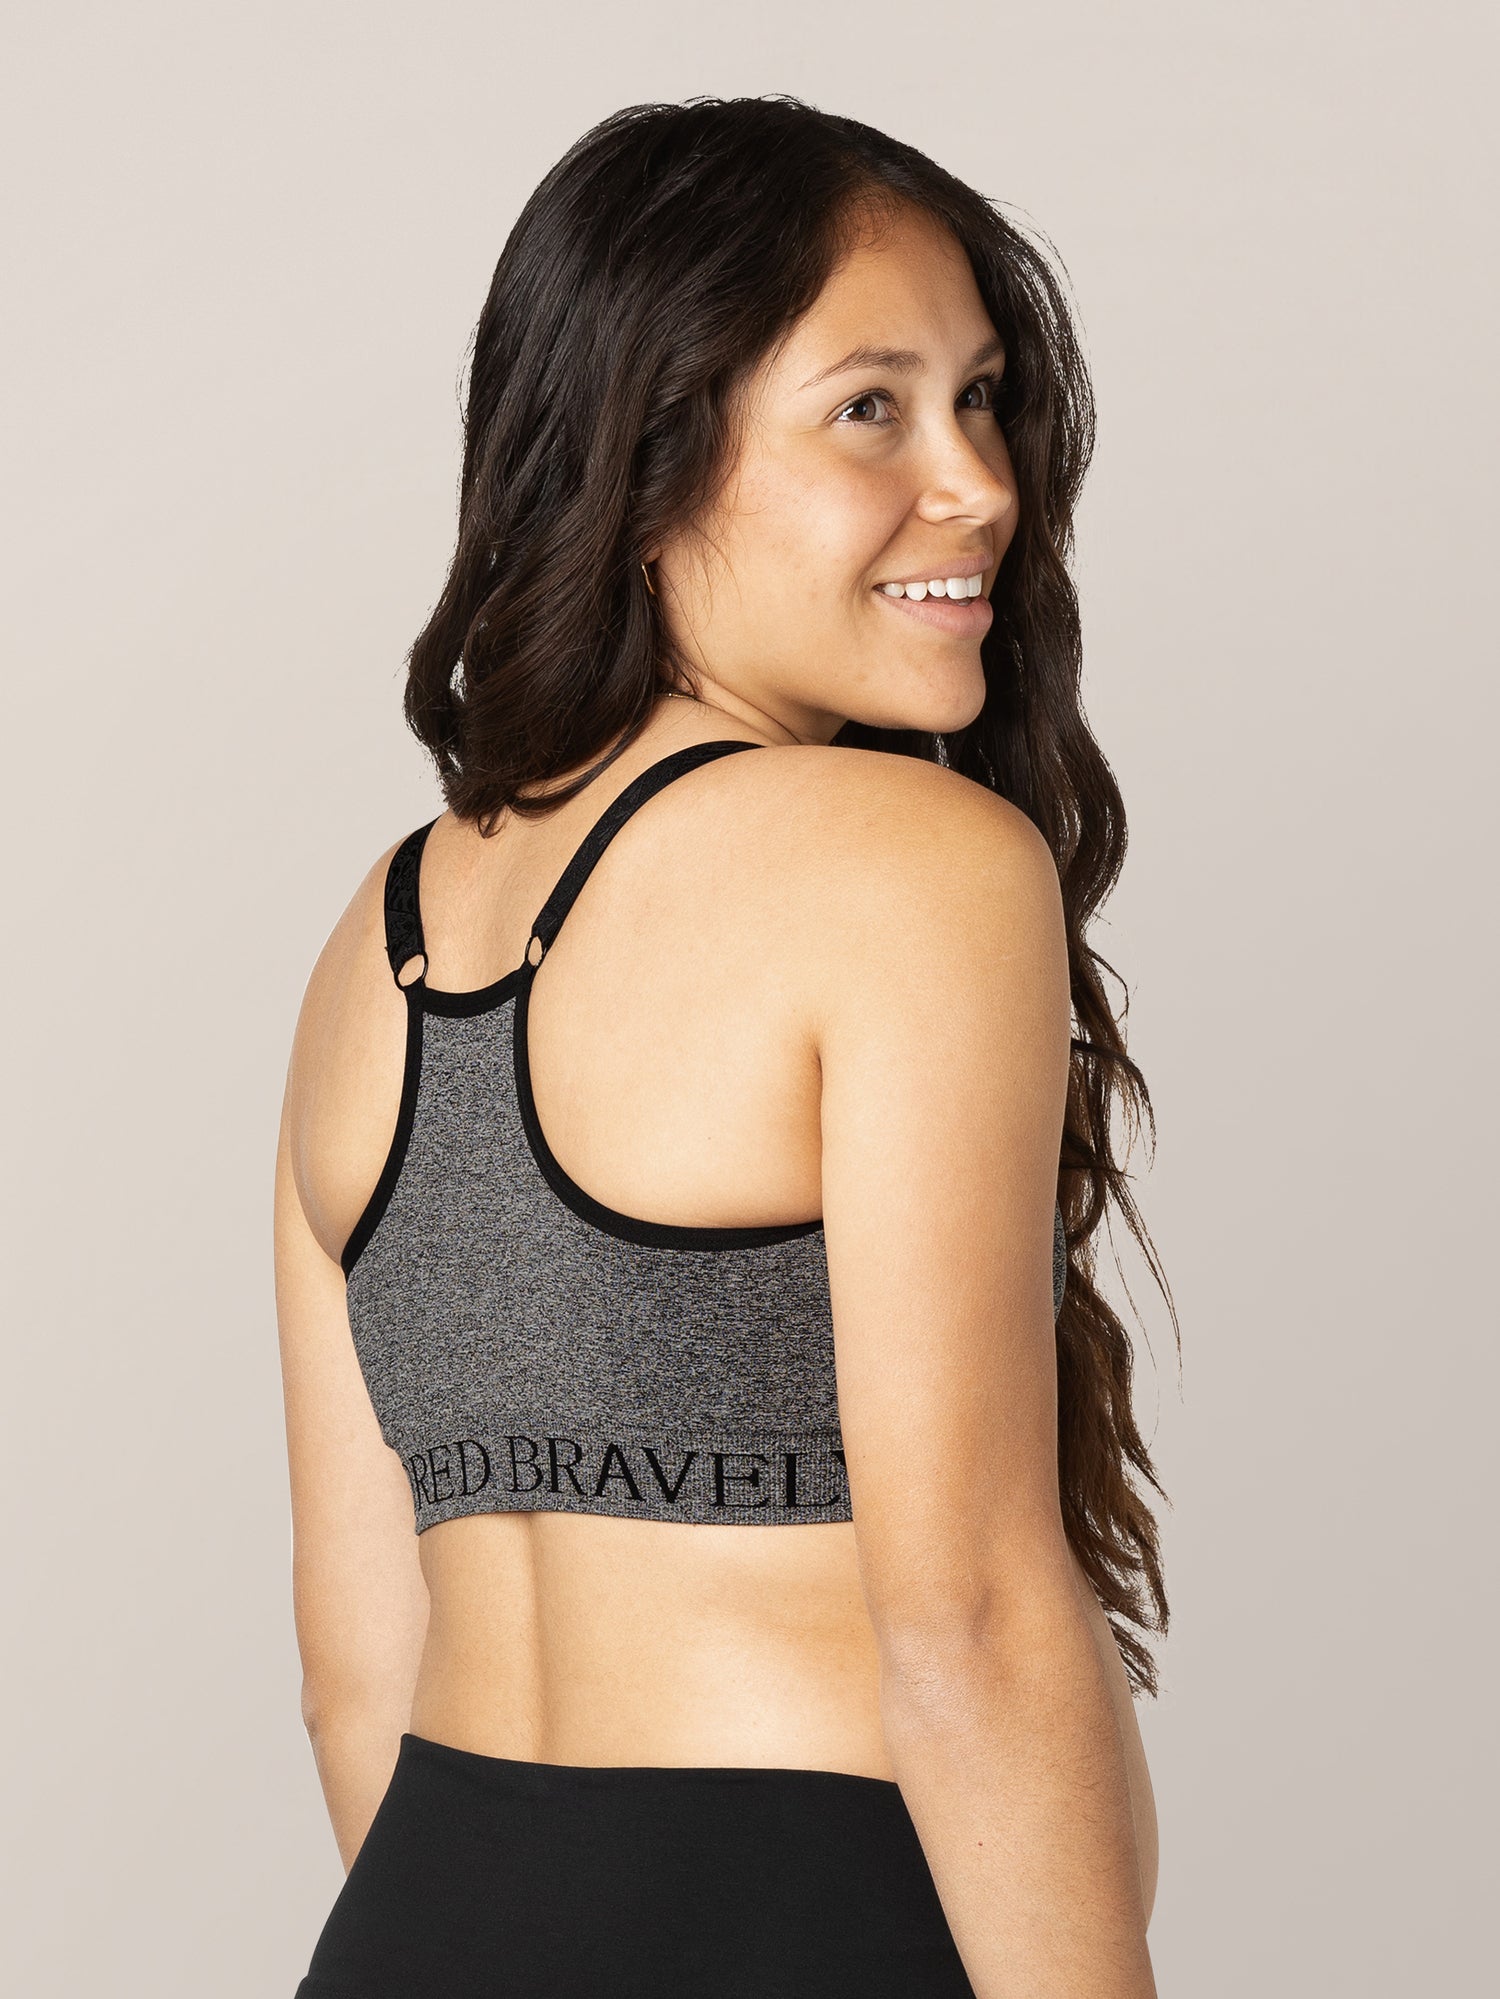 $0 - $25 Racerback Non-Padded Cups Sports Bras.